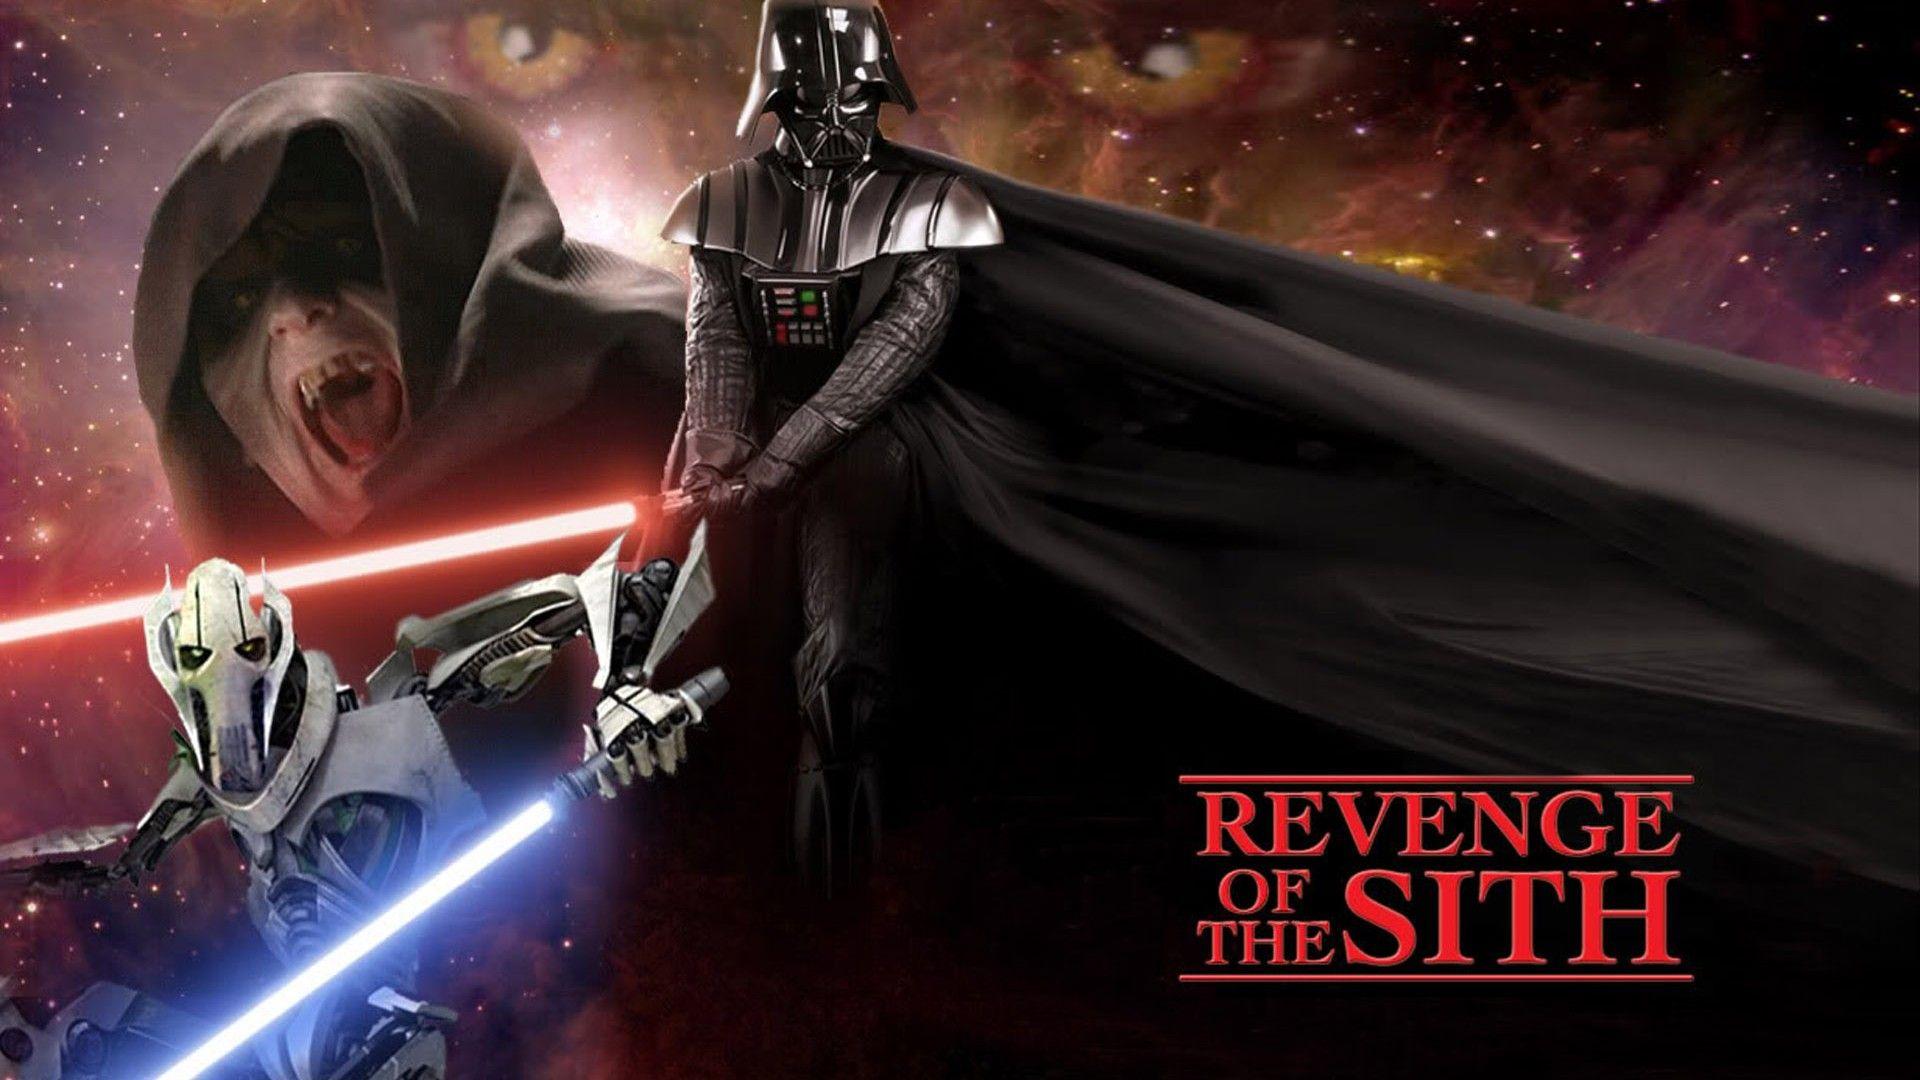 Star Wars Episode III: Revenge of the Sith Wallpapers and Backgrounds.